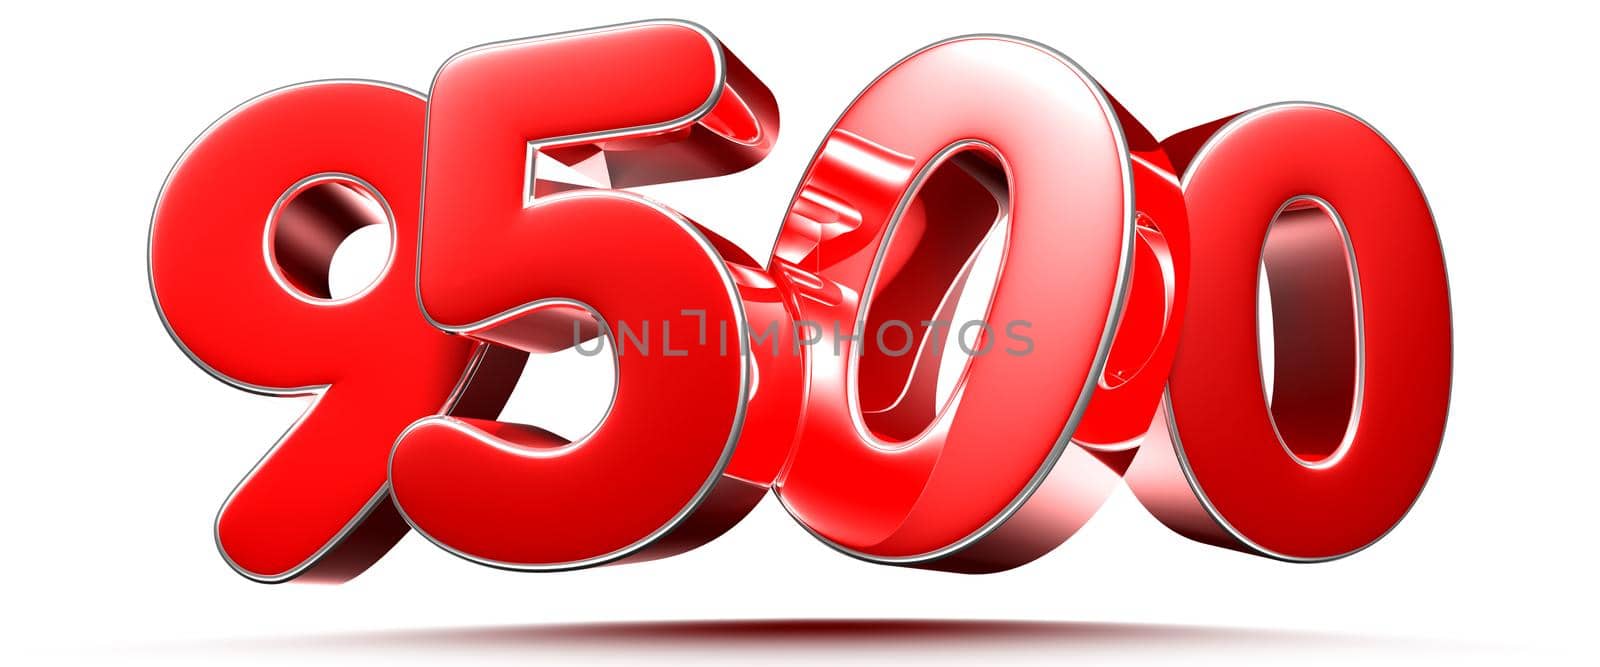 Rounded red numbers 9500 on white background 3D illustration with clipping path by thitimontoyai